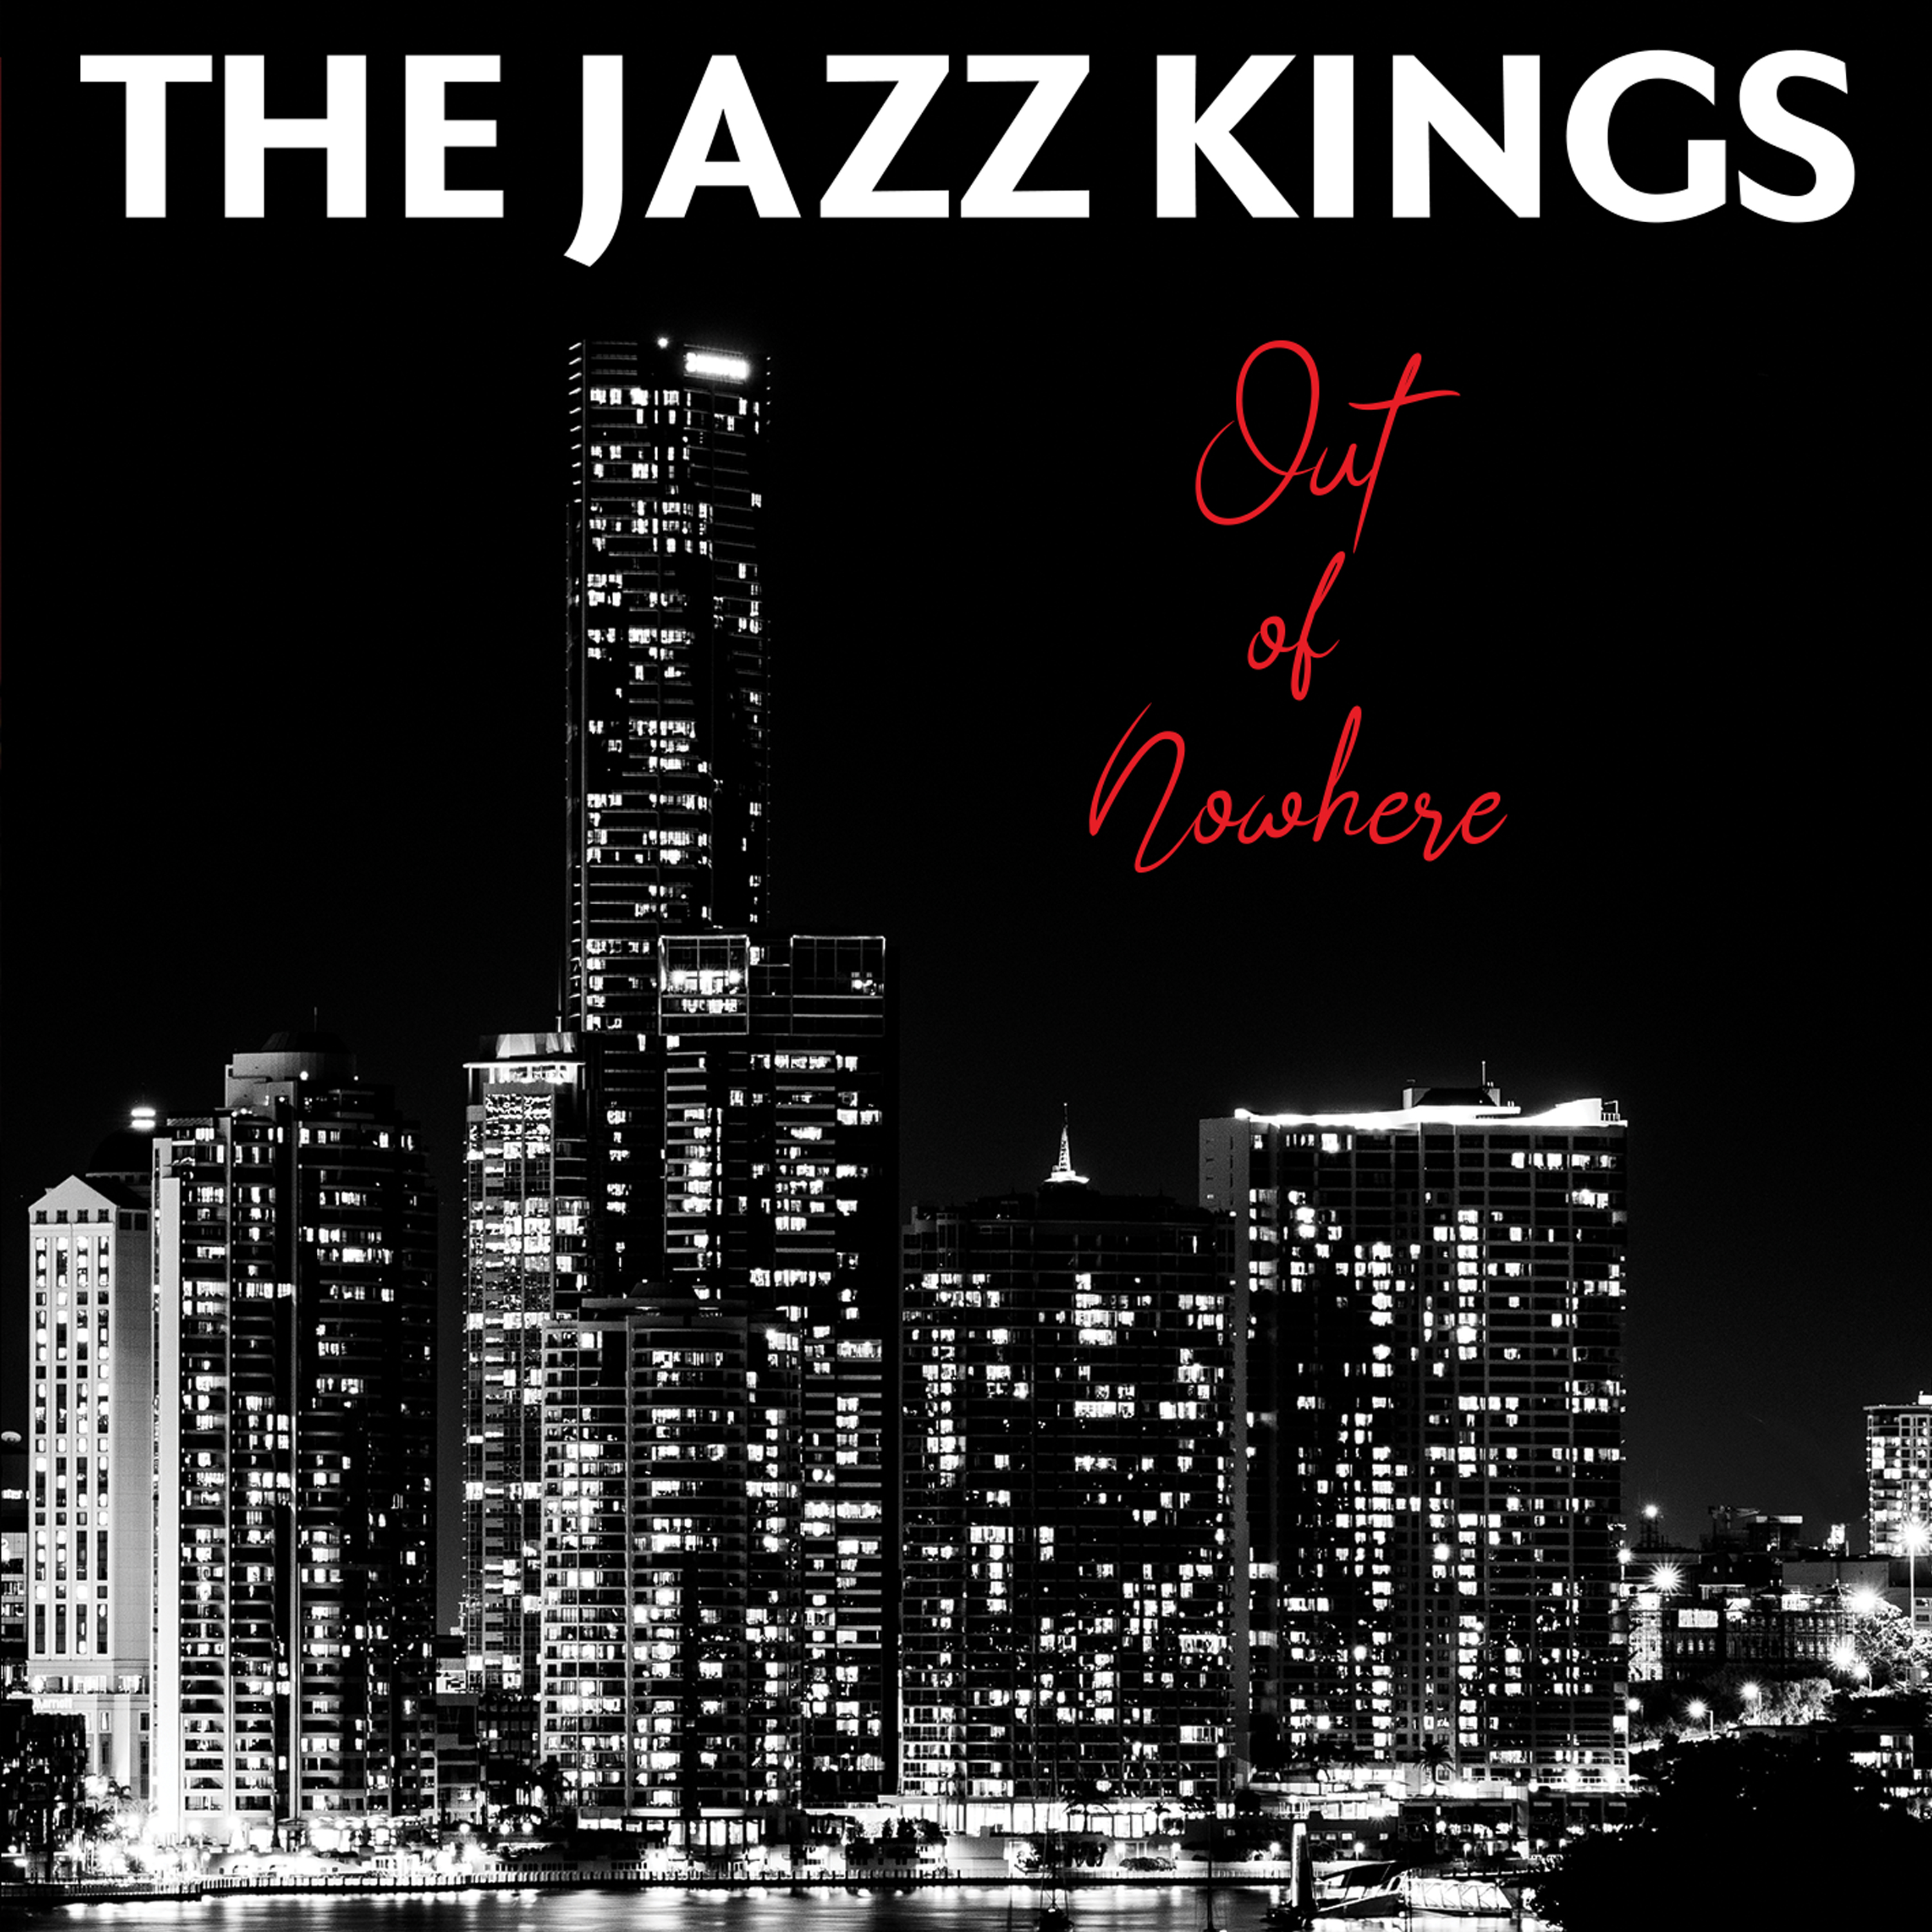 There’s No Holding Back This Australian Jazz Band: Introducing The Jazz Kings